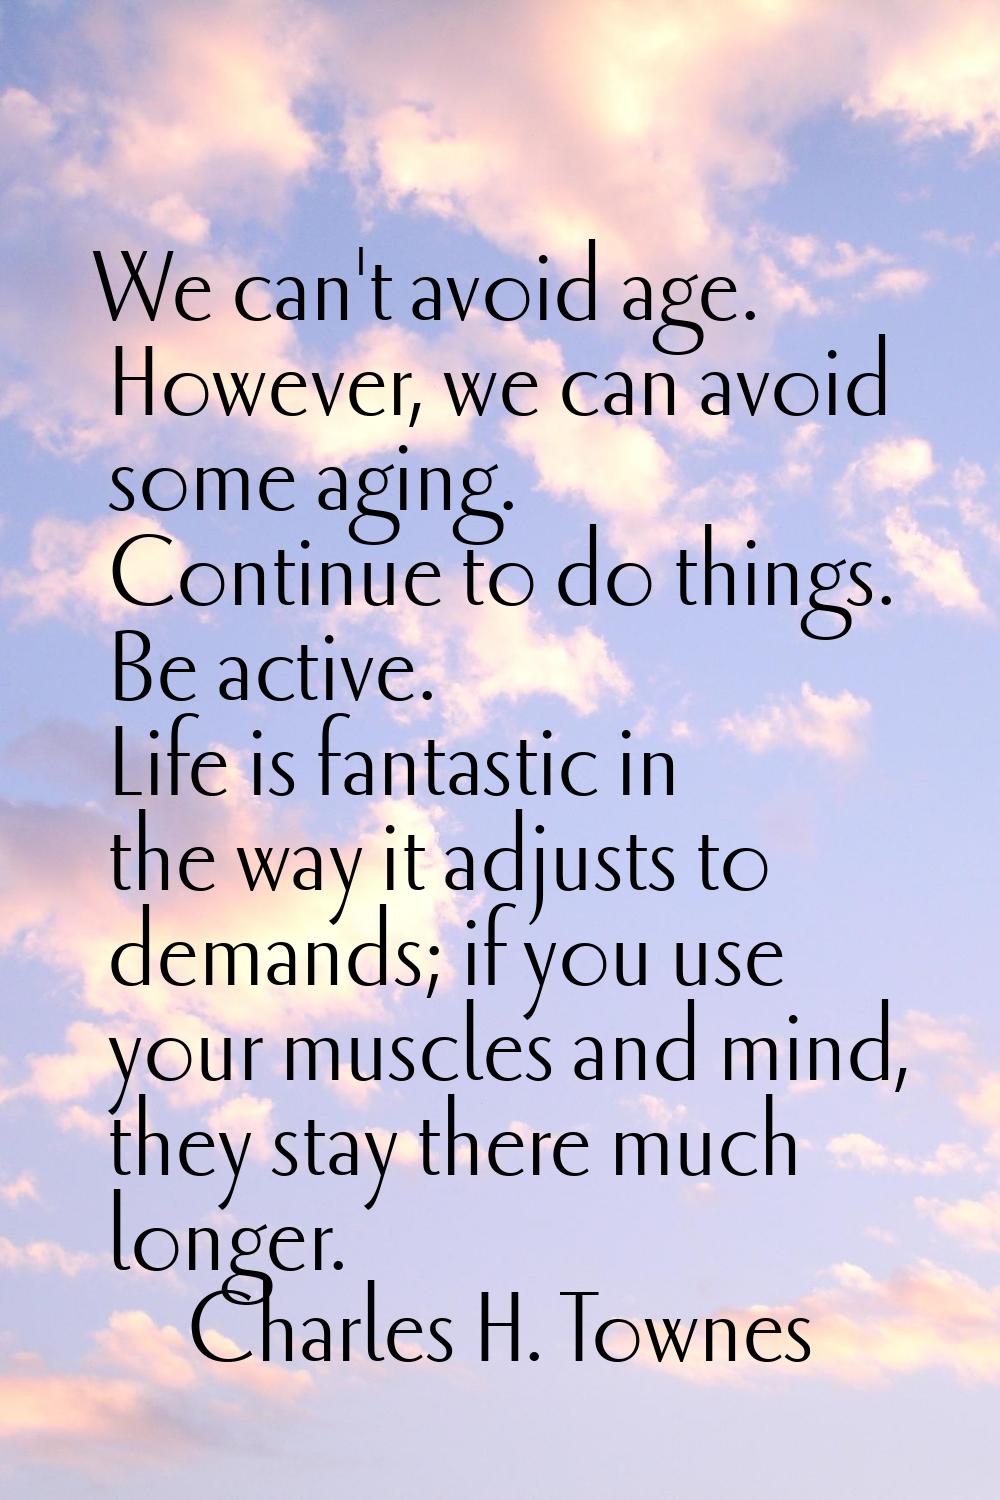 We can't avoid age. However, we can avoid some aging. Continue to do things. Be active. Life is fan